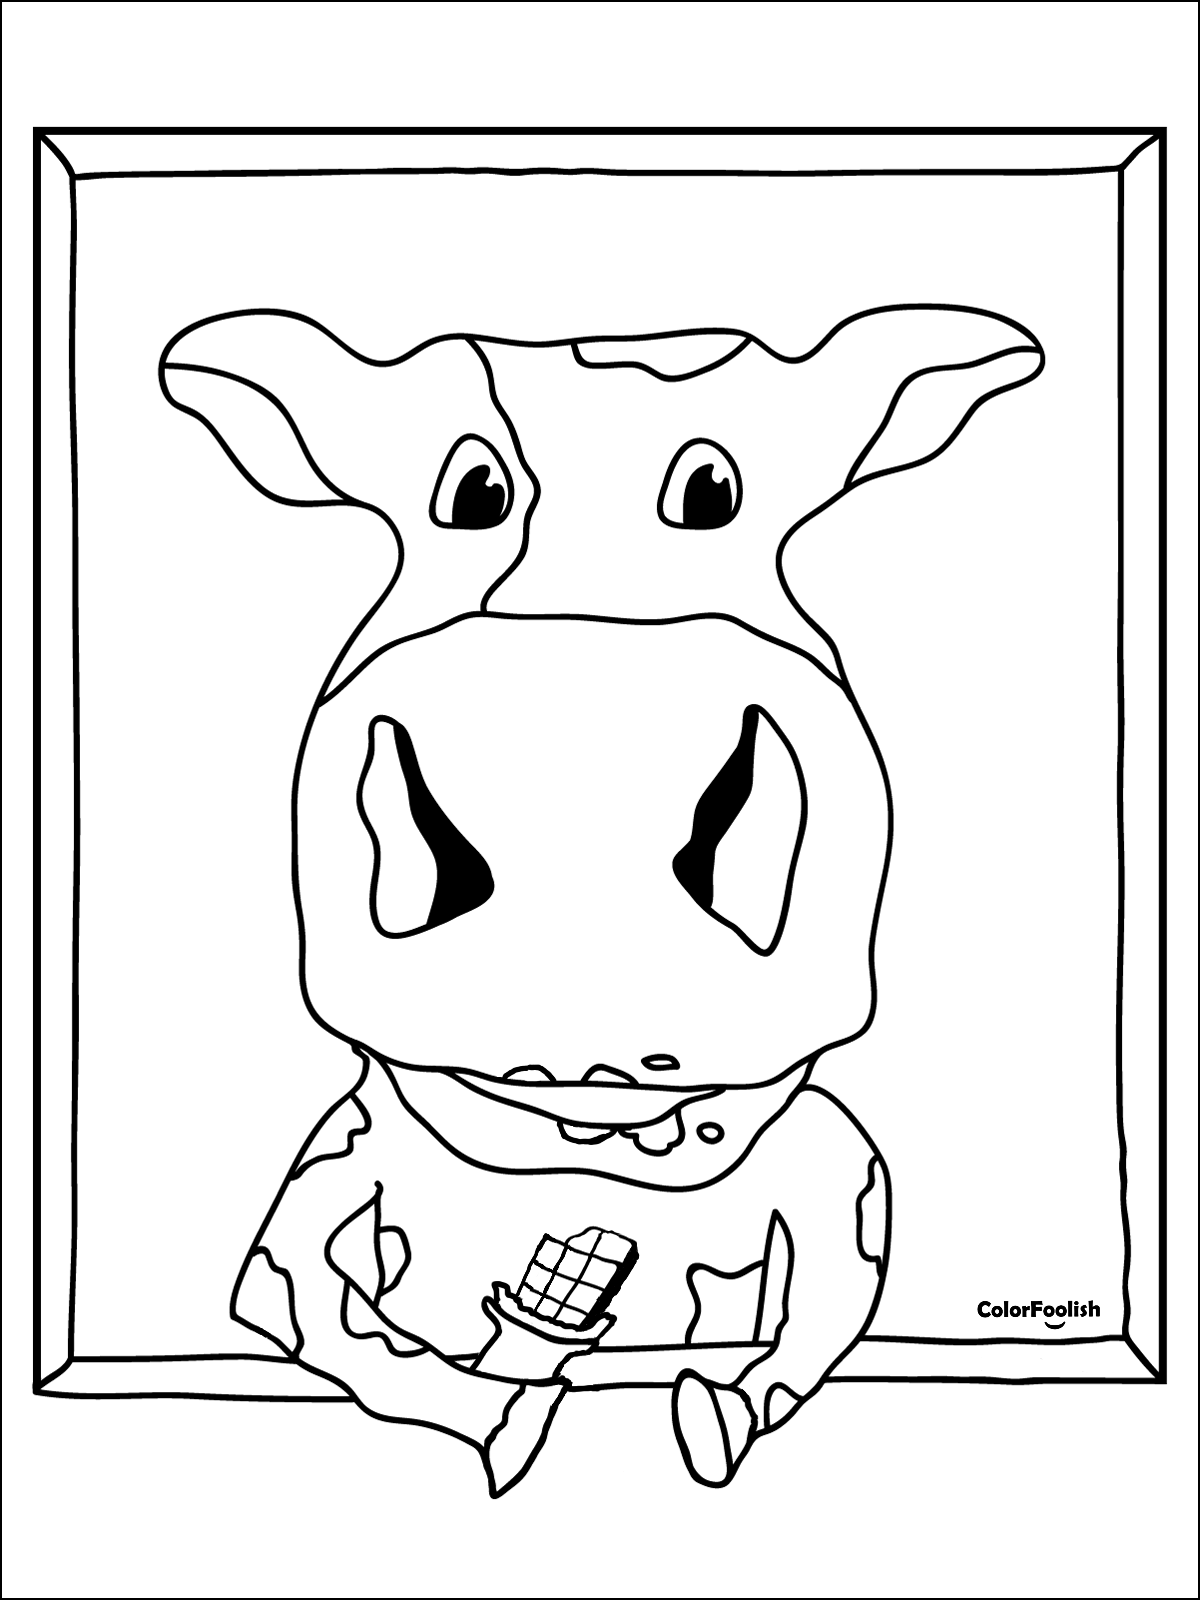 Coloring page of a chocolate milk cow